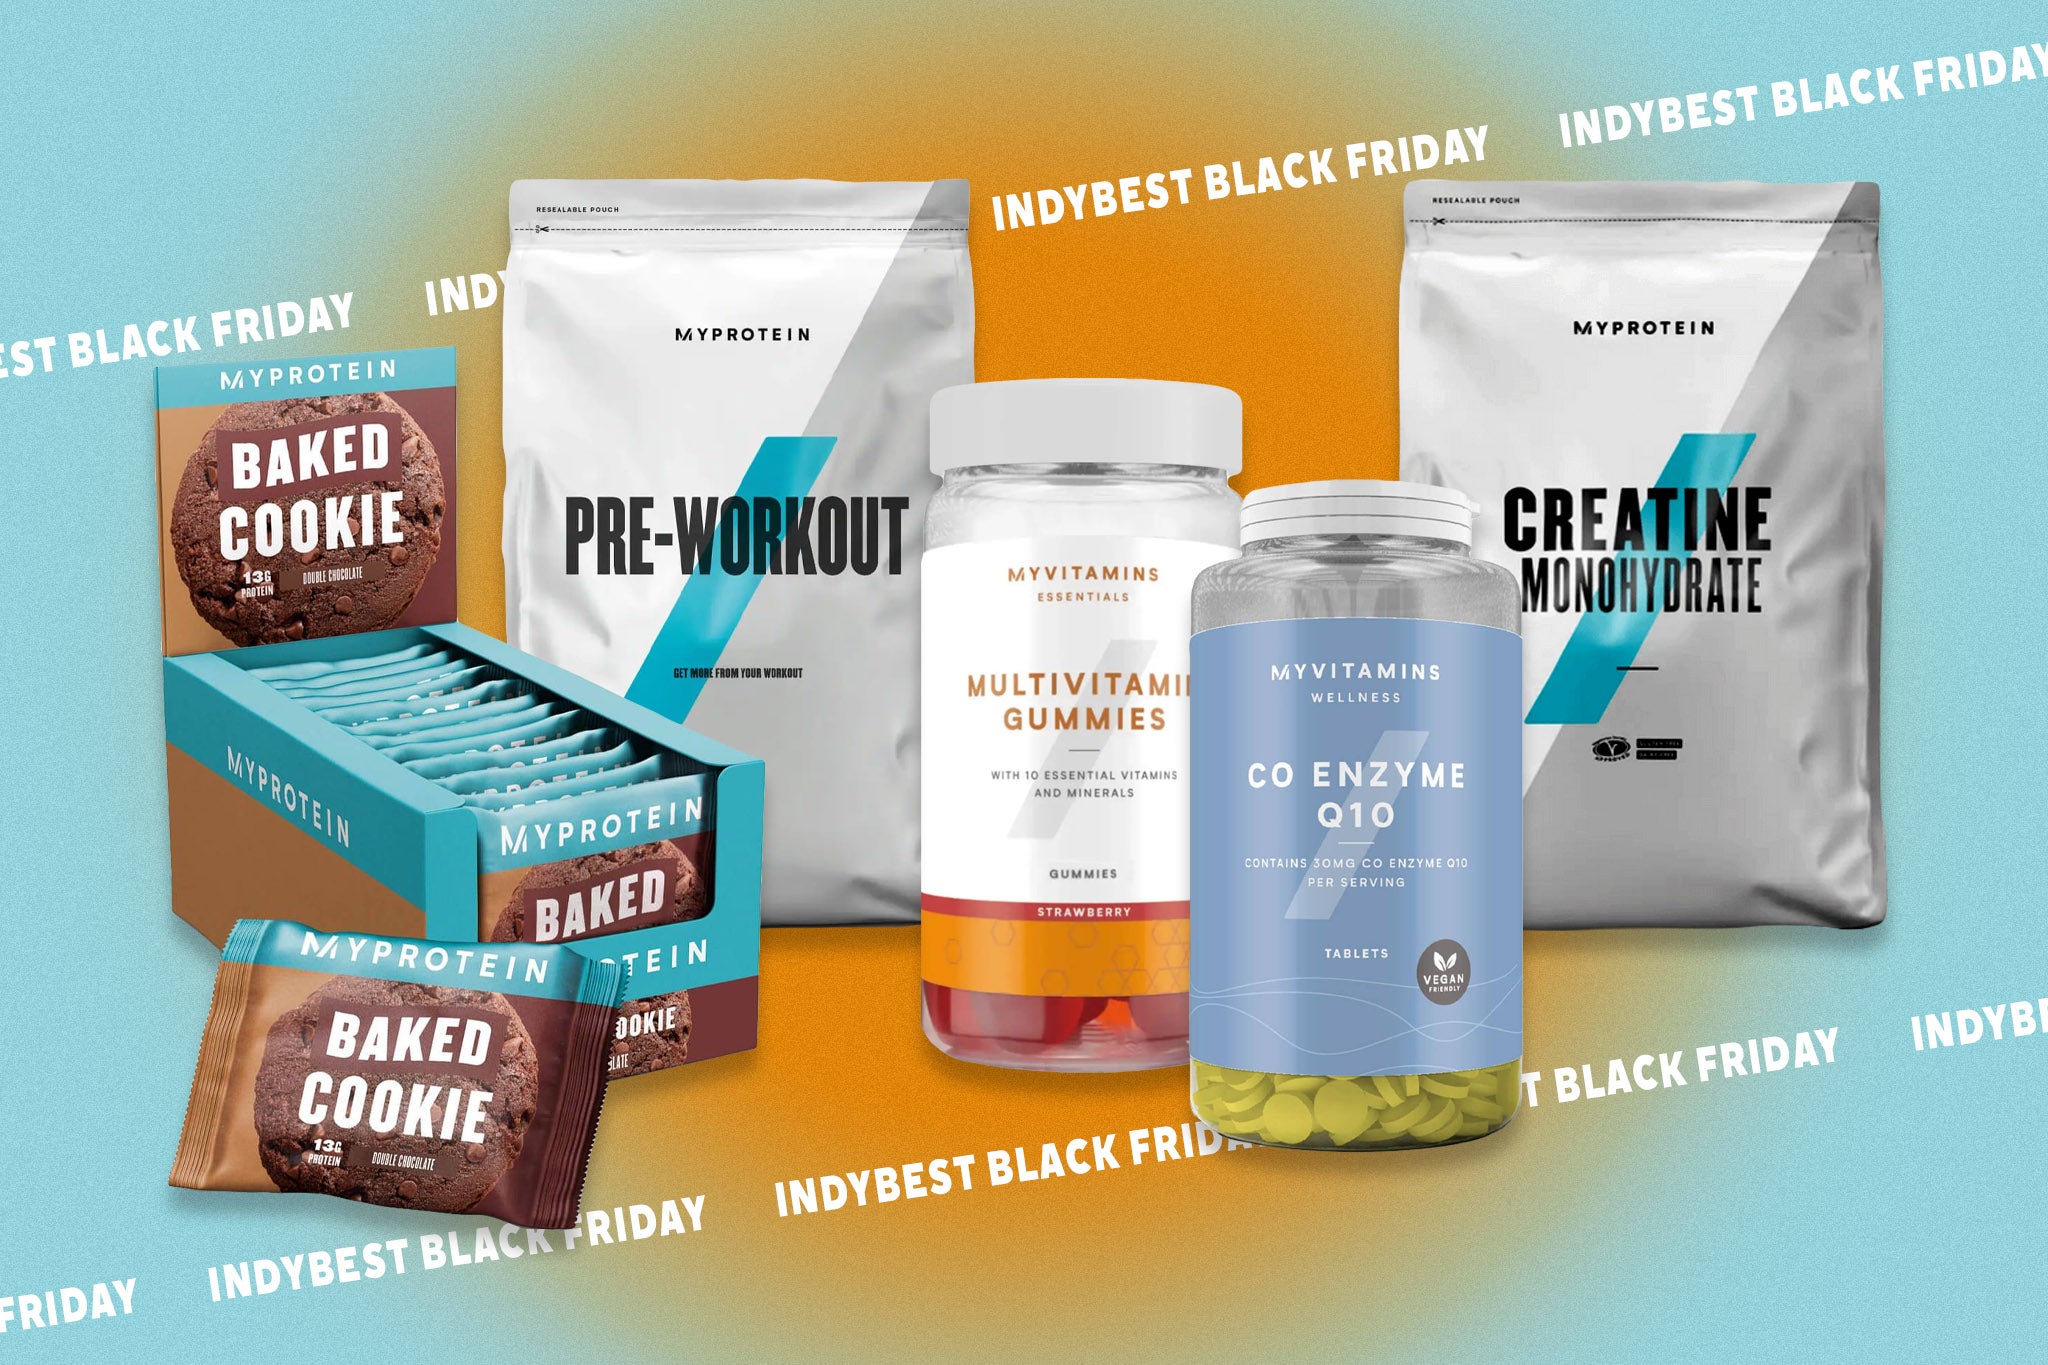 Best Black Friday Myprotein deals: Get up to 80% off right now